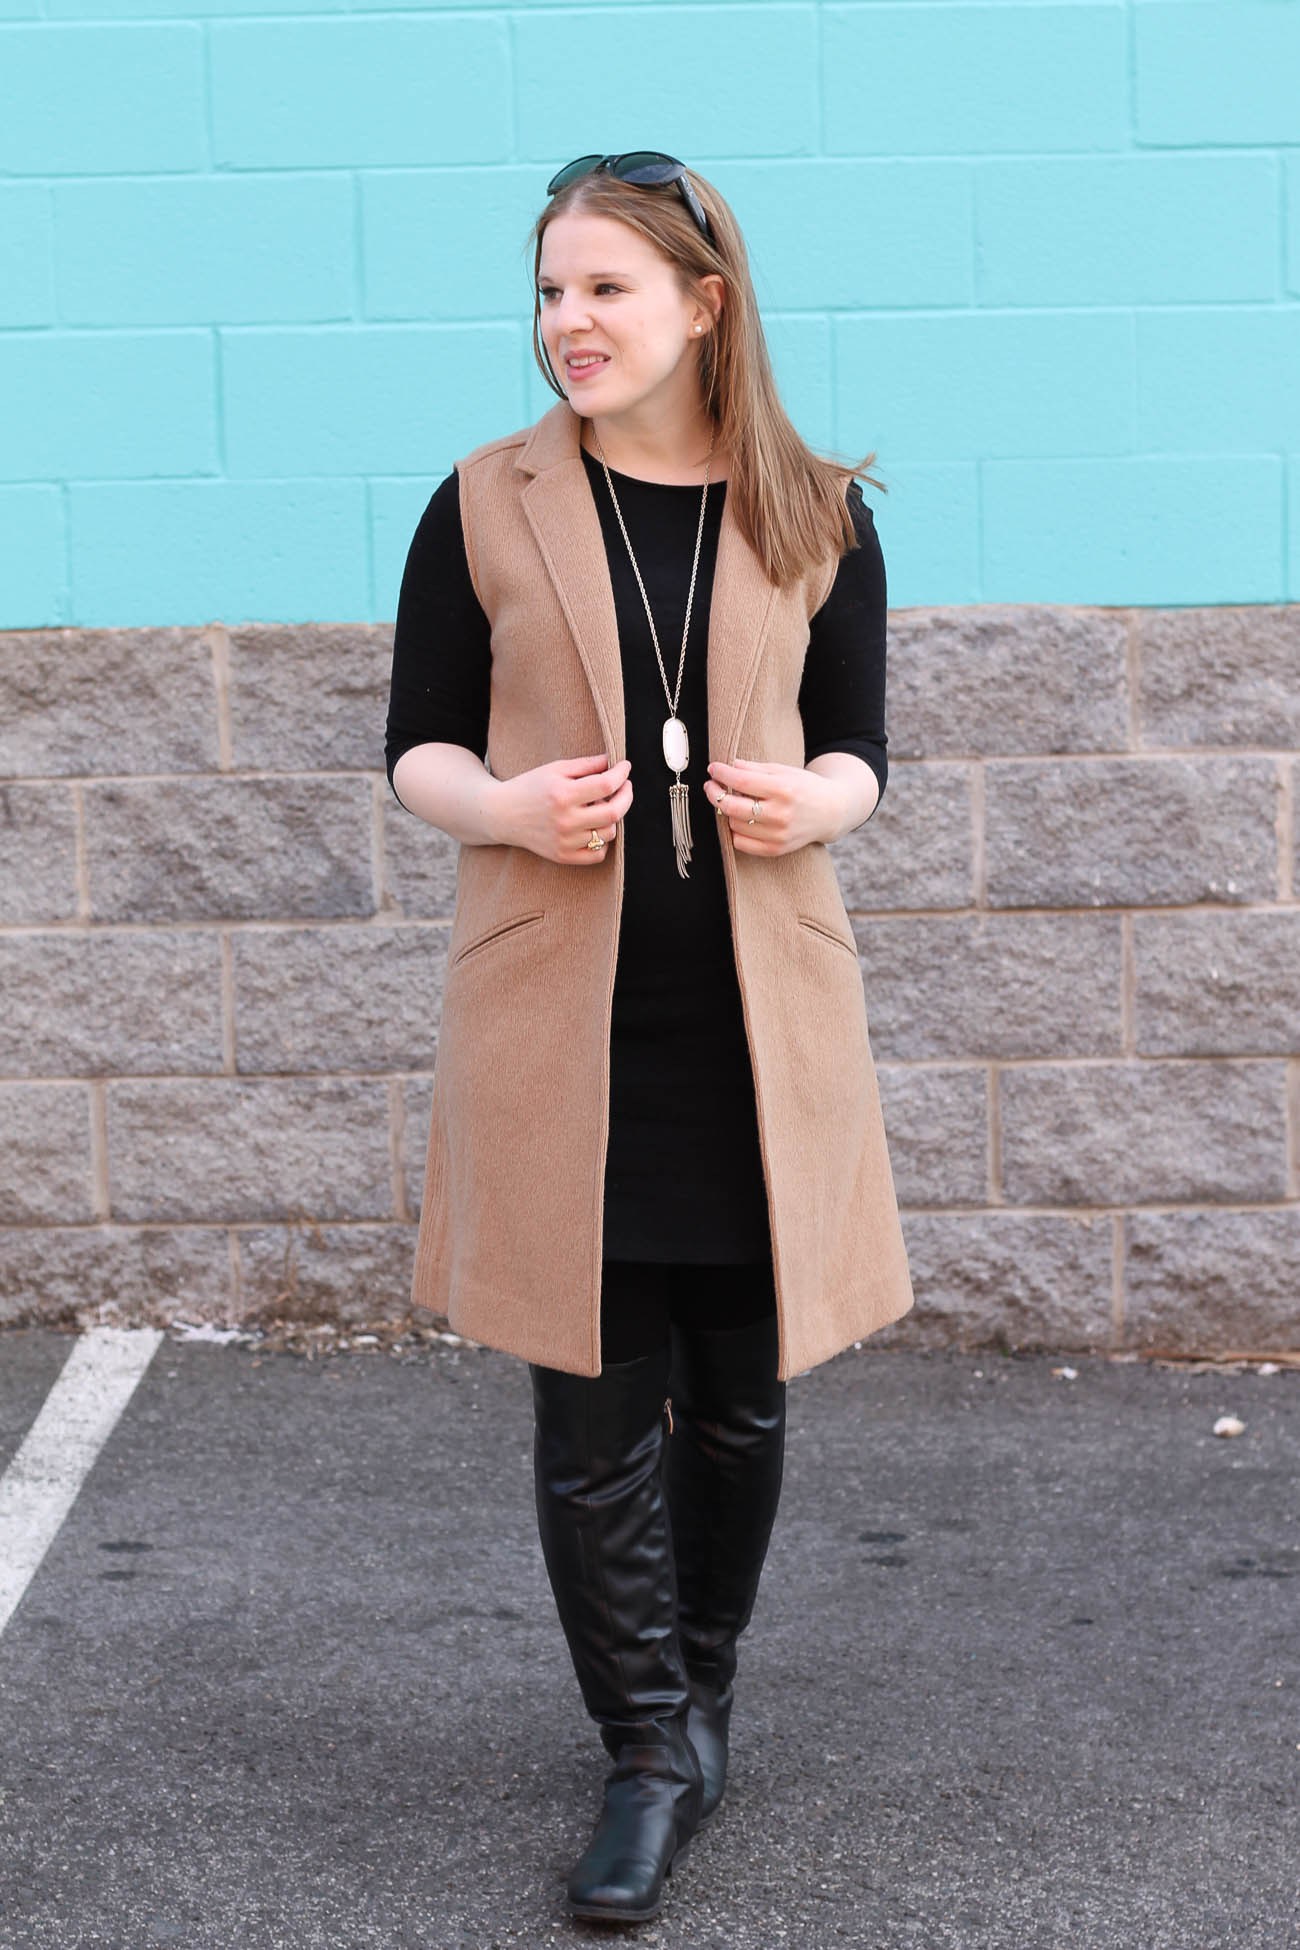 The Little Black Work Dress | Something Good, women, fashion, clothing, style, clothes, little black dress, camel sleeveless trench, gap vest, old navy dress, over the knee boots, black leather boots, kendra scott necklace, work outfit, fall outfit